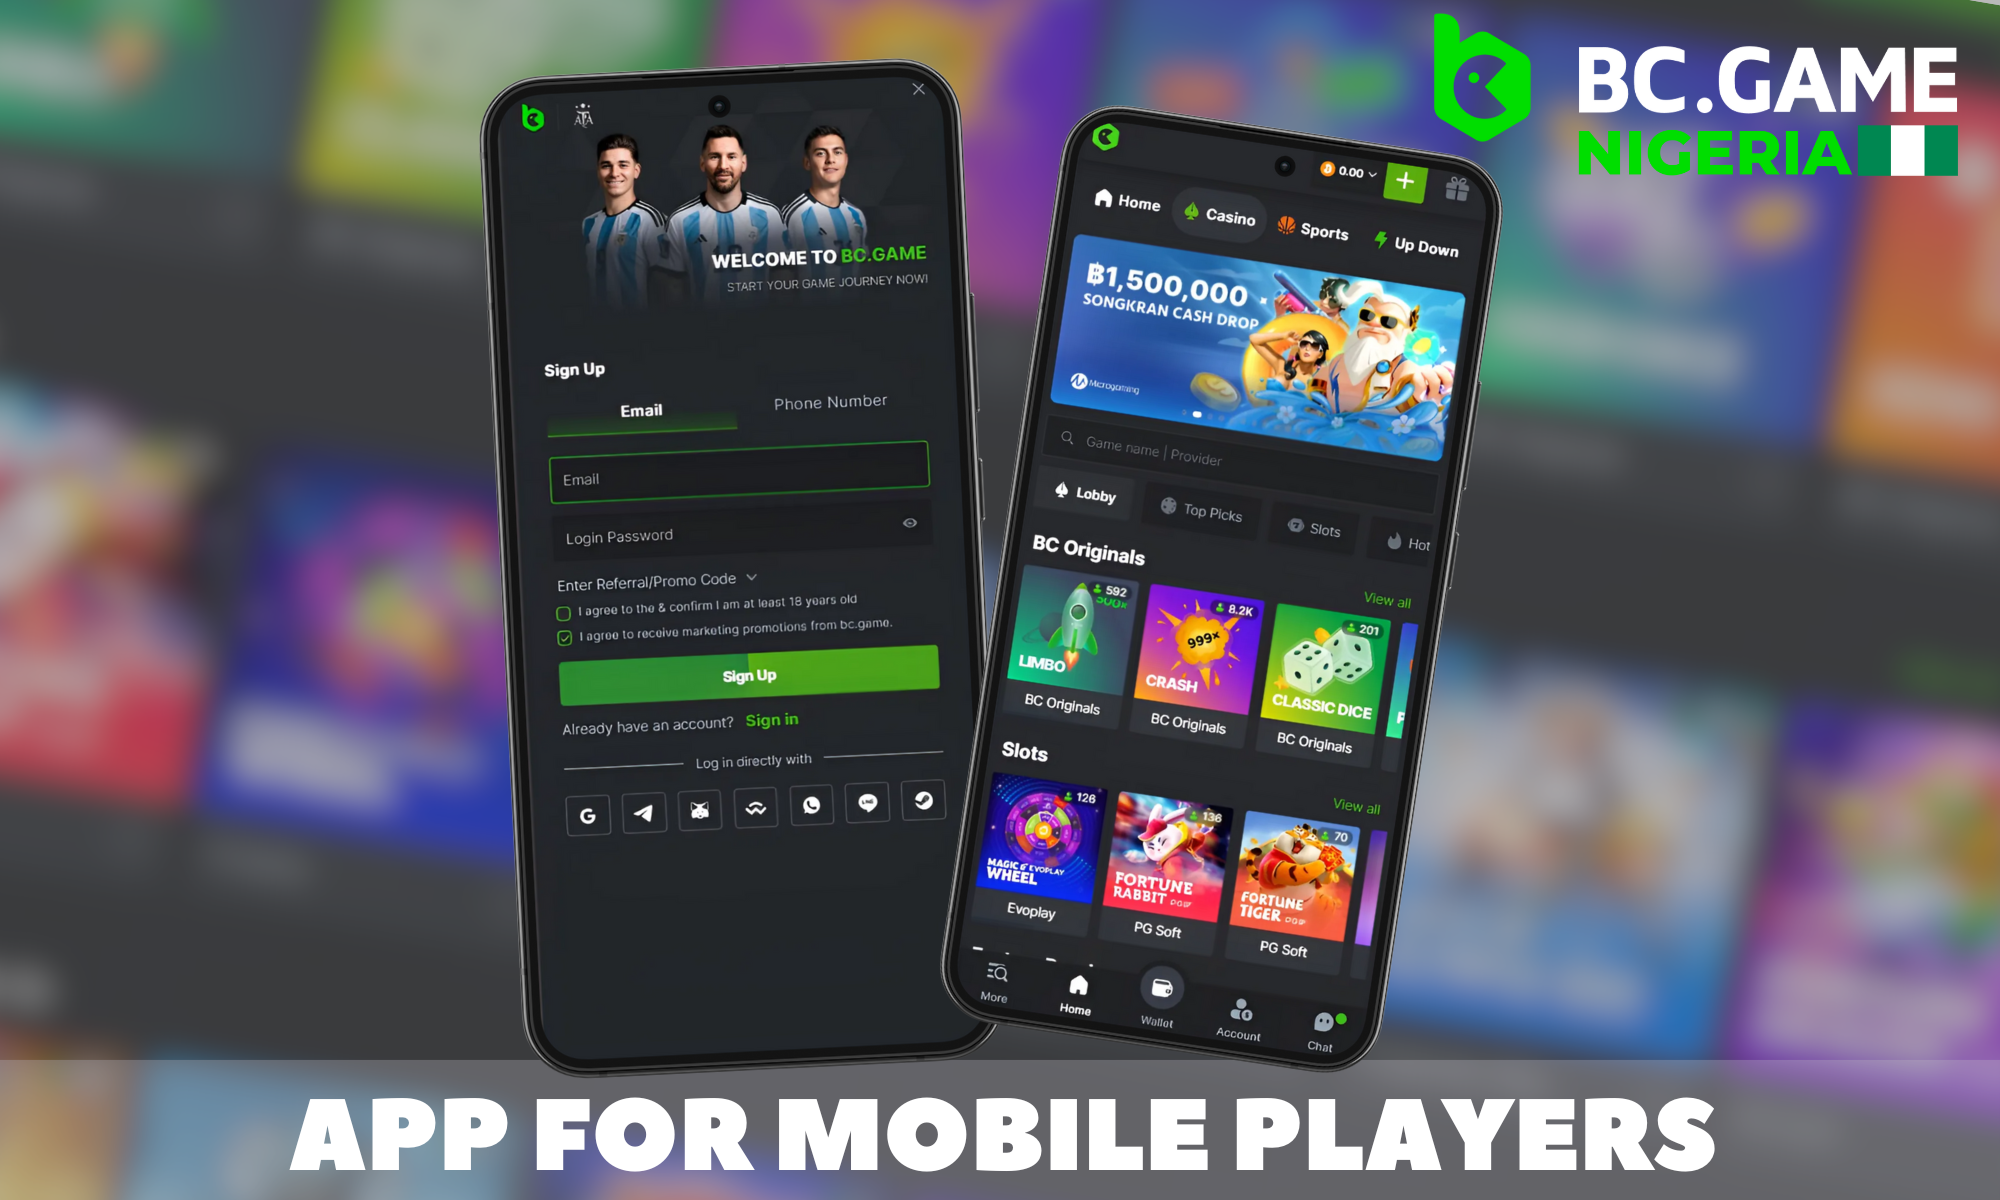 BC Game offers access to the BC Game app for players from Nigeria for free